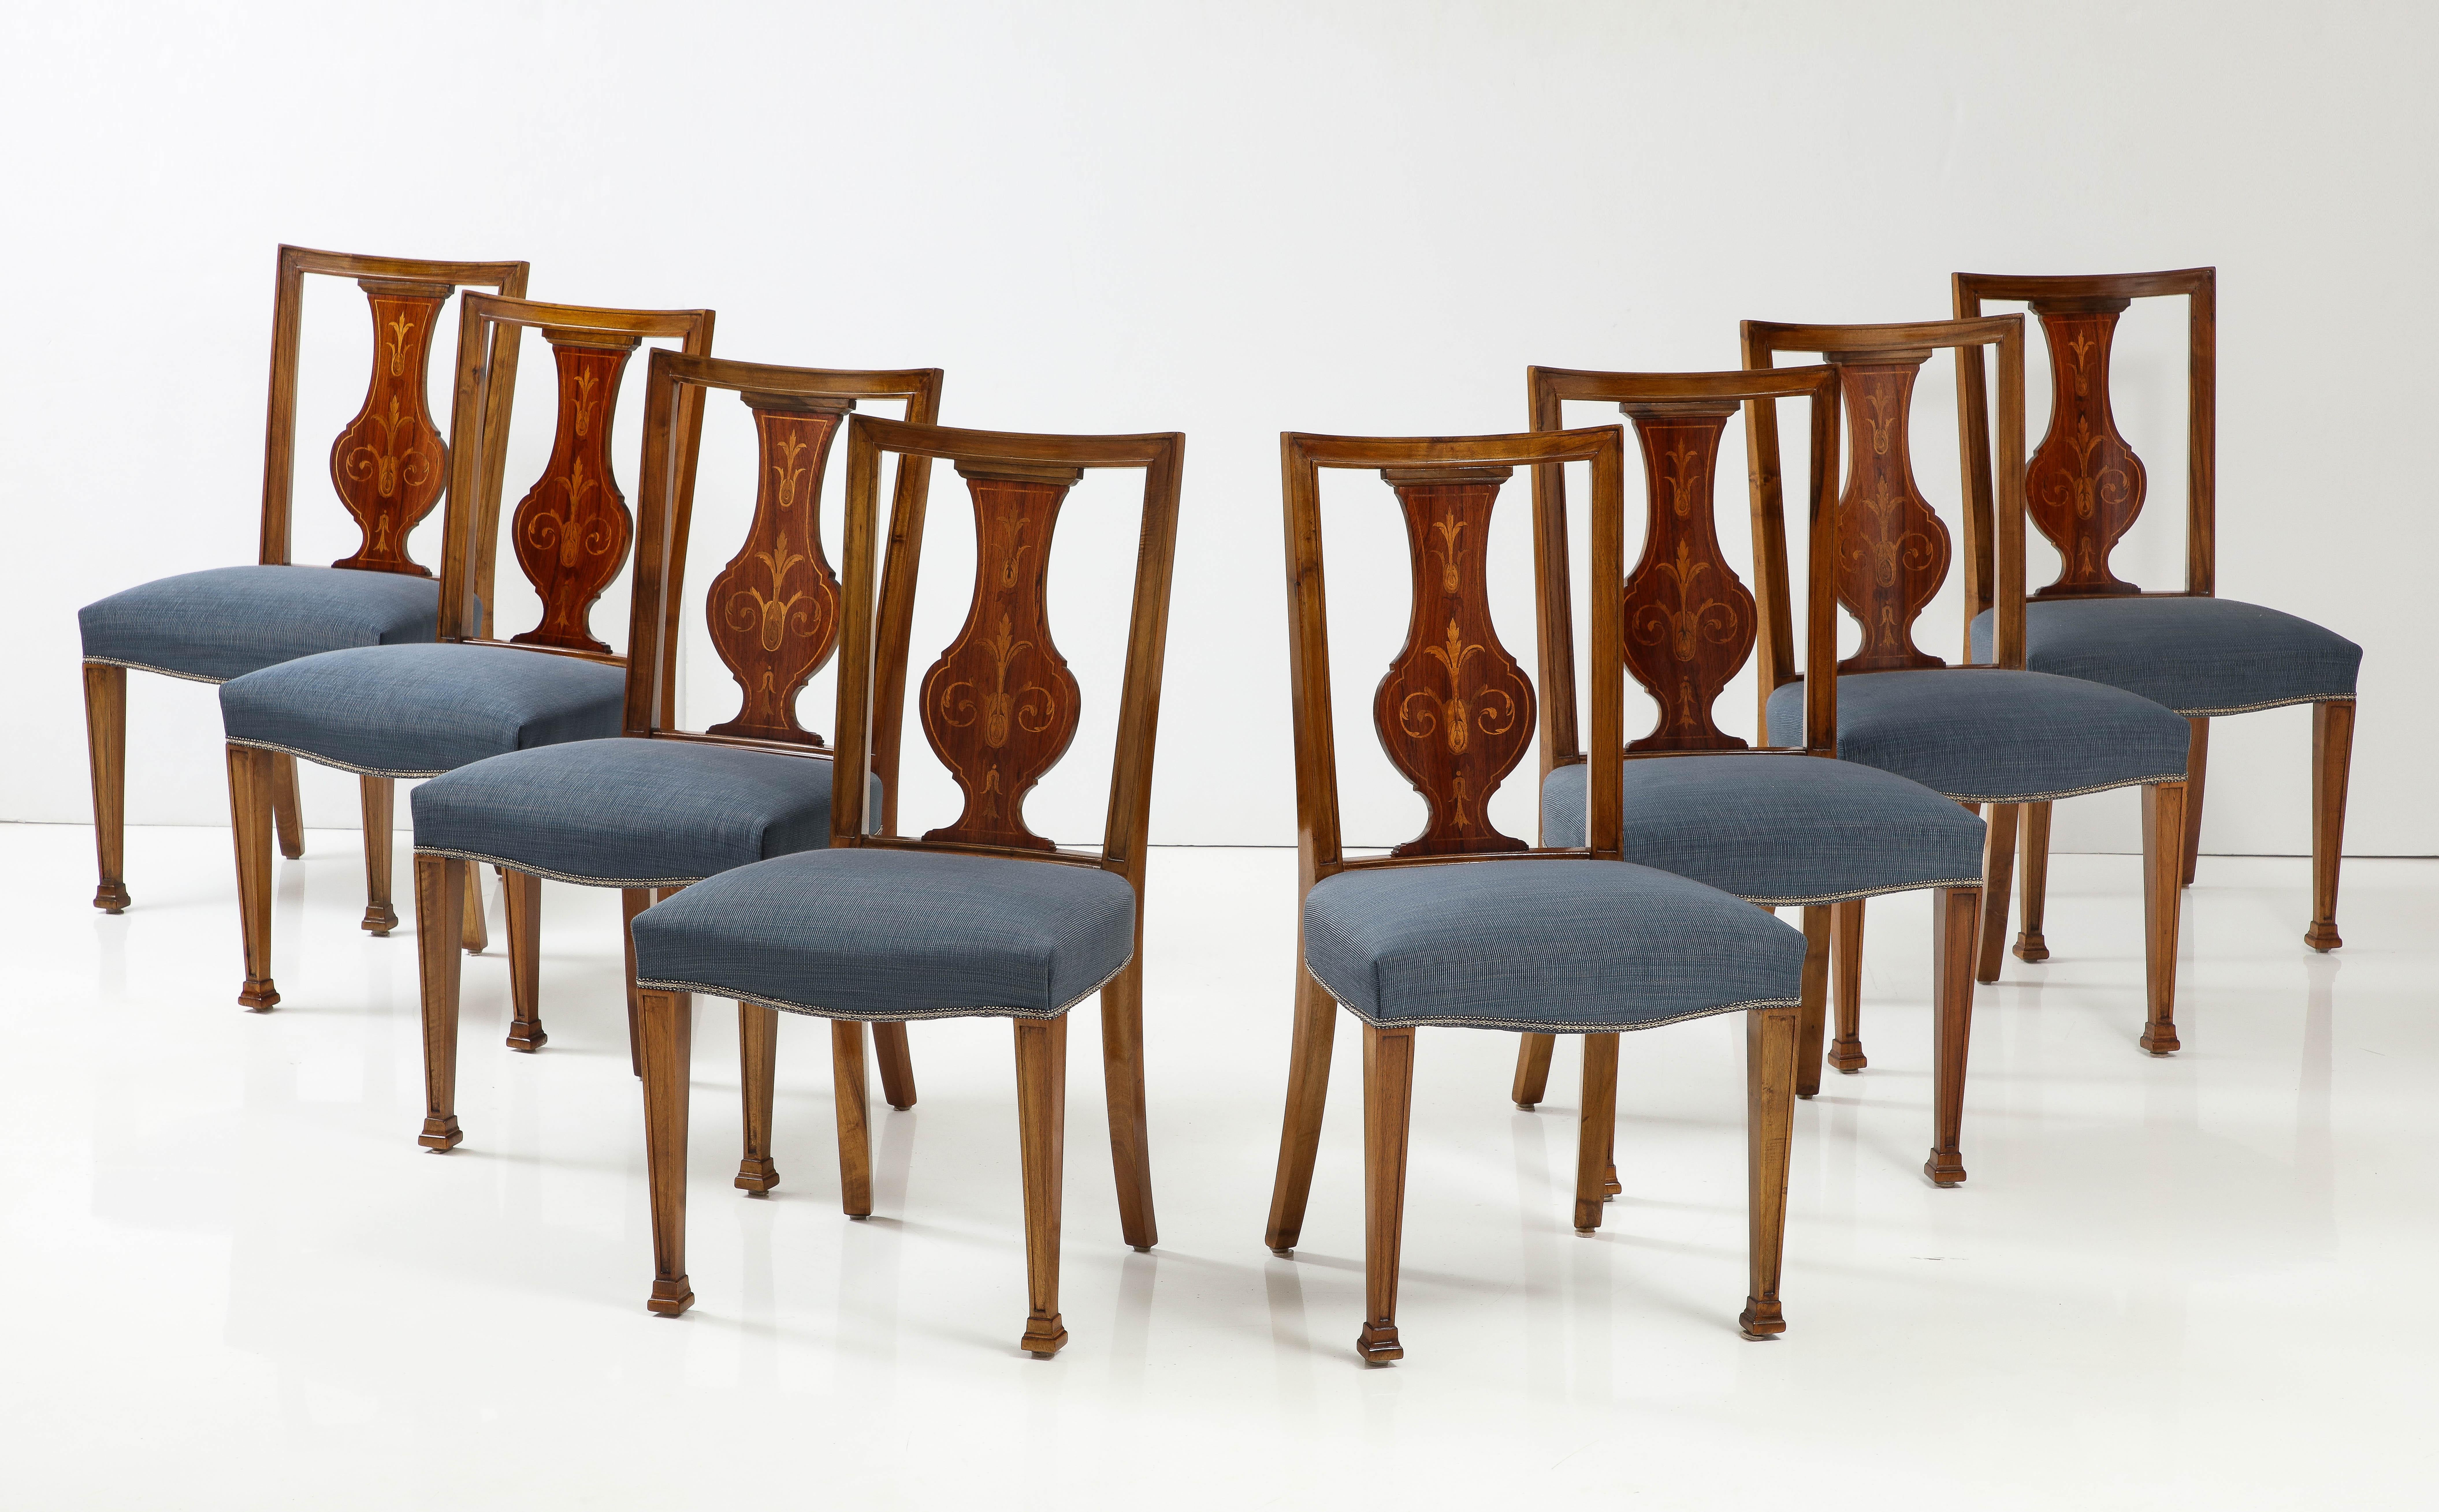 A set of eight Baltic Neoclassical style walnut sidechairs with fruitwood inlays, Circa 1910s, each with a channeled rectangular backrest, baluster form back splat with fruitwood inlays, tight upholstered seats raised on square tapered and channeled